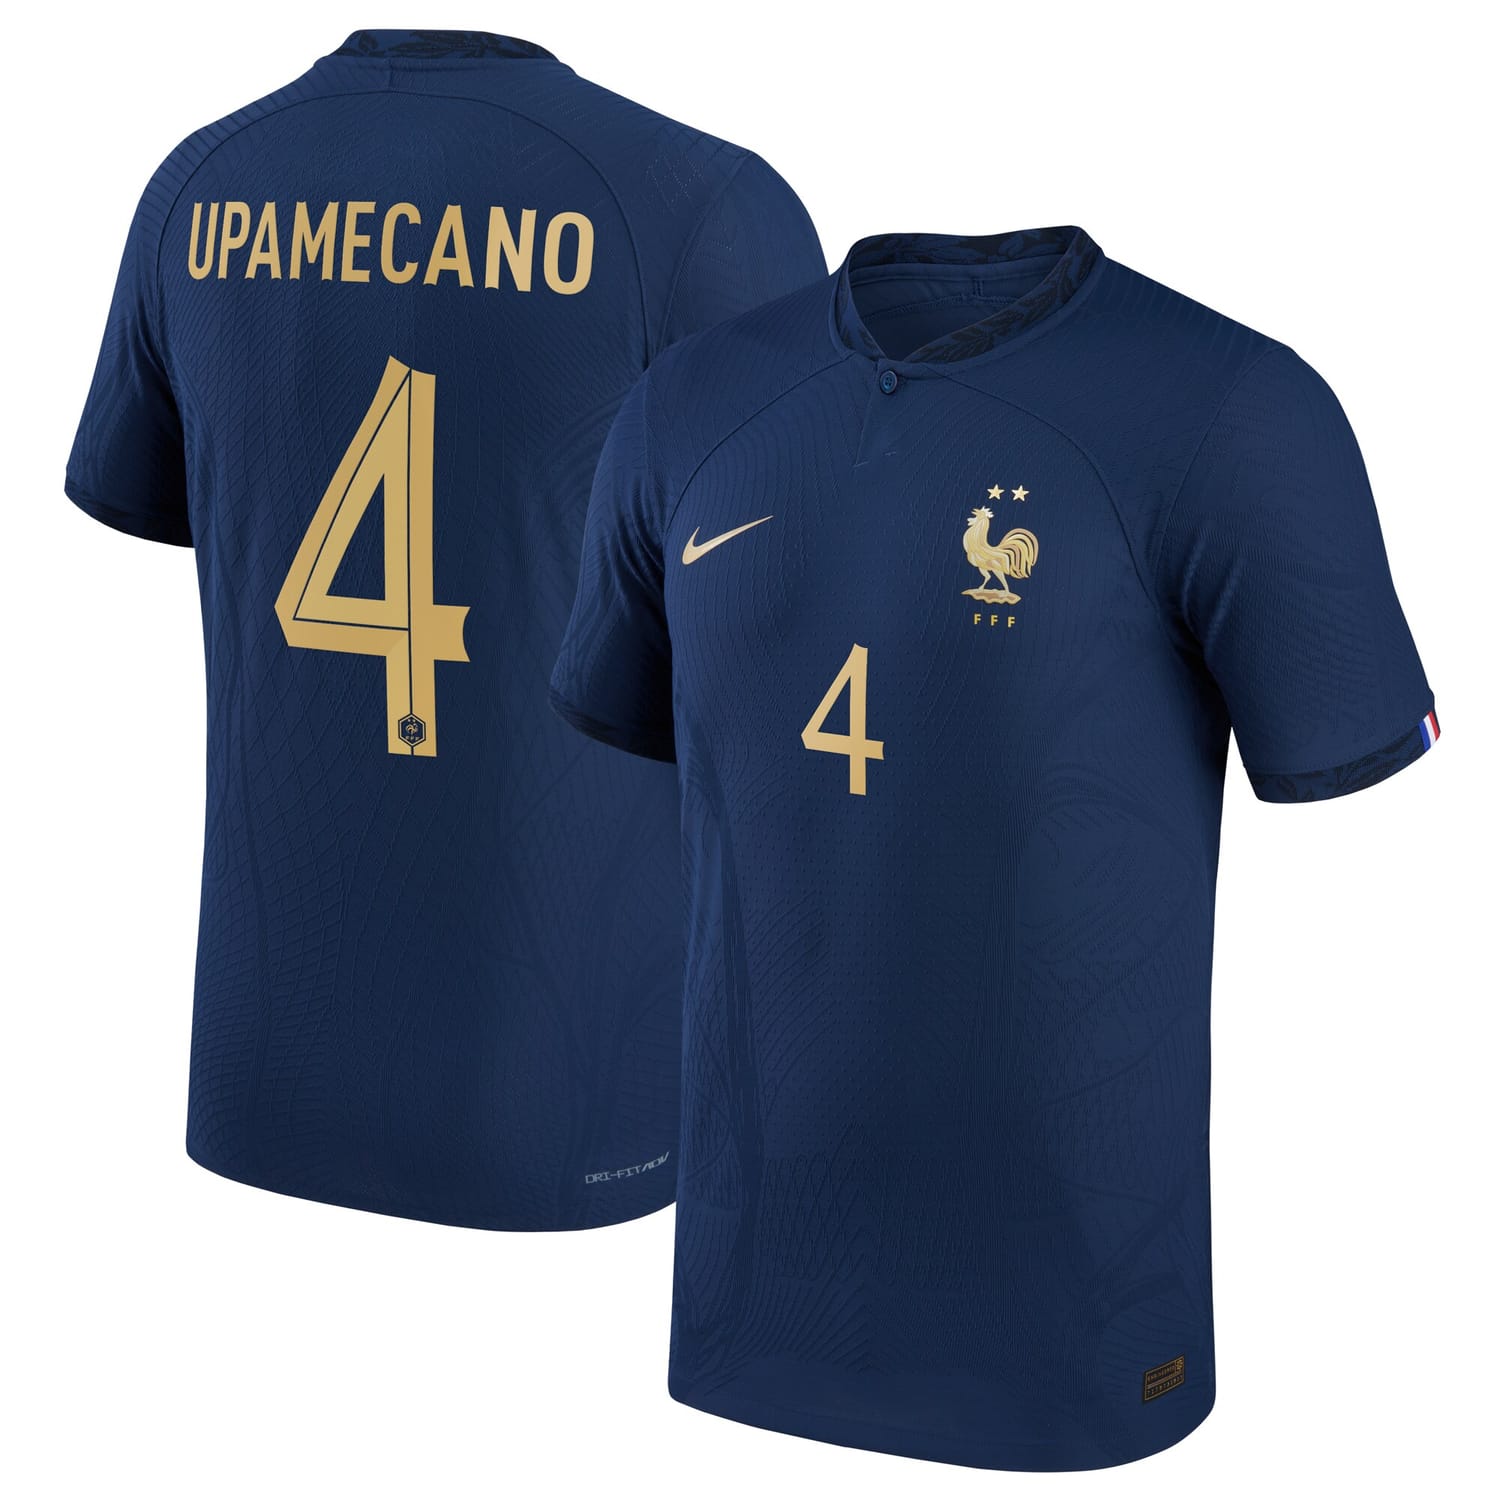 France National Team Home Authentic Jersey Shirt 2022 player Dayot Upamecano 4 printing for Men